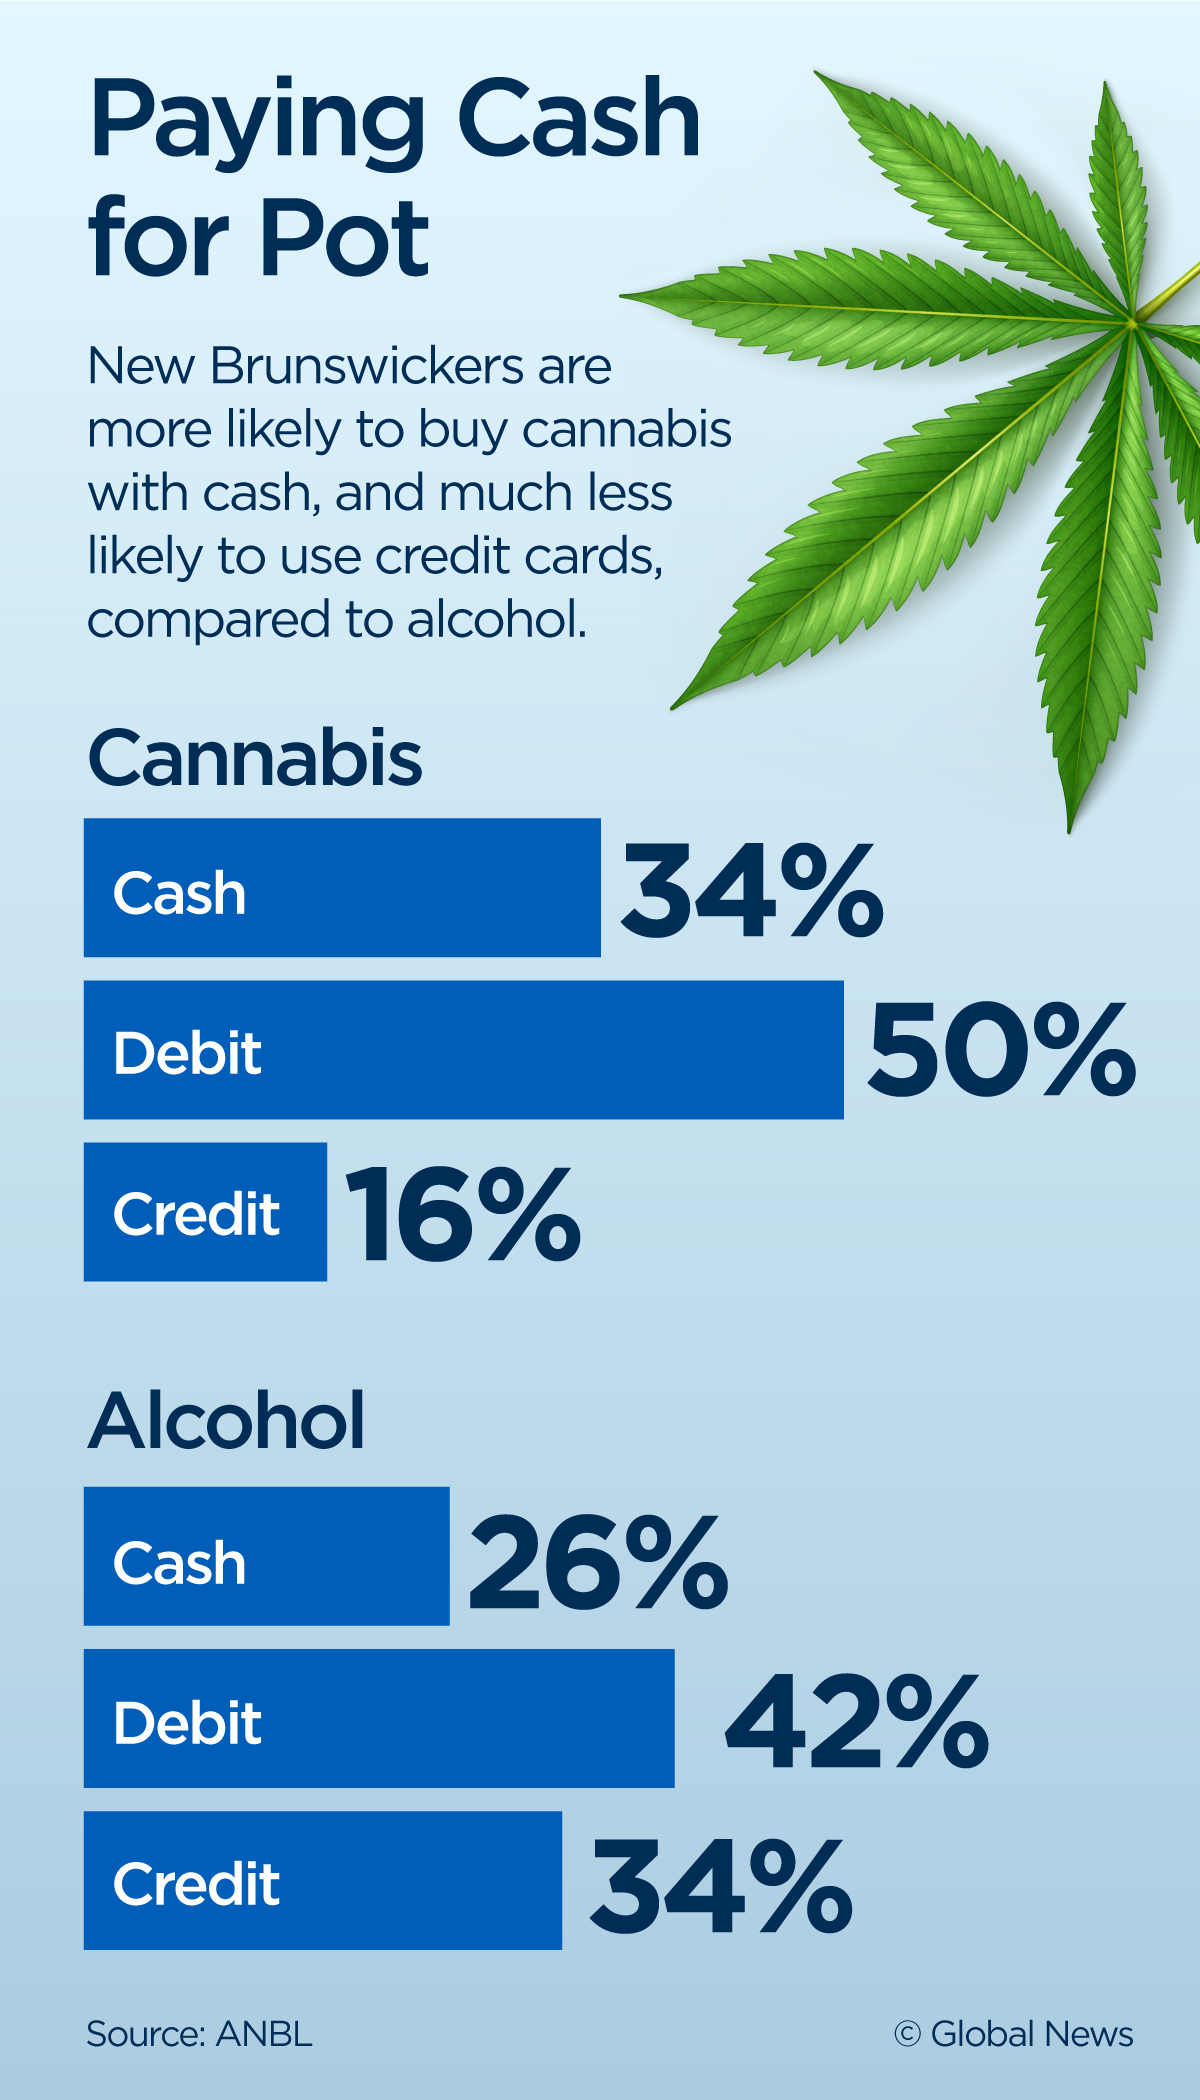 New Brunswickers are avoiding buying pot with credit cards, sales figures show - National ...